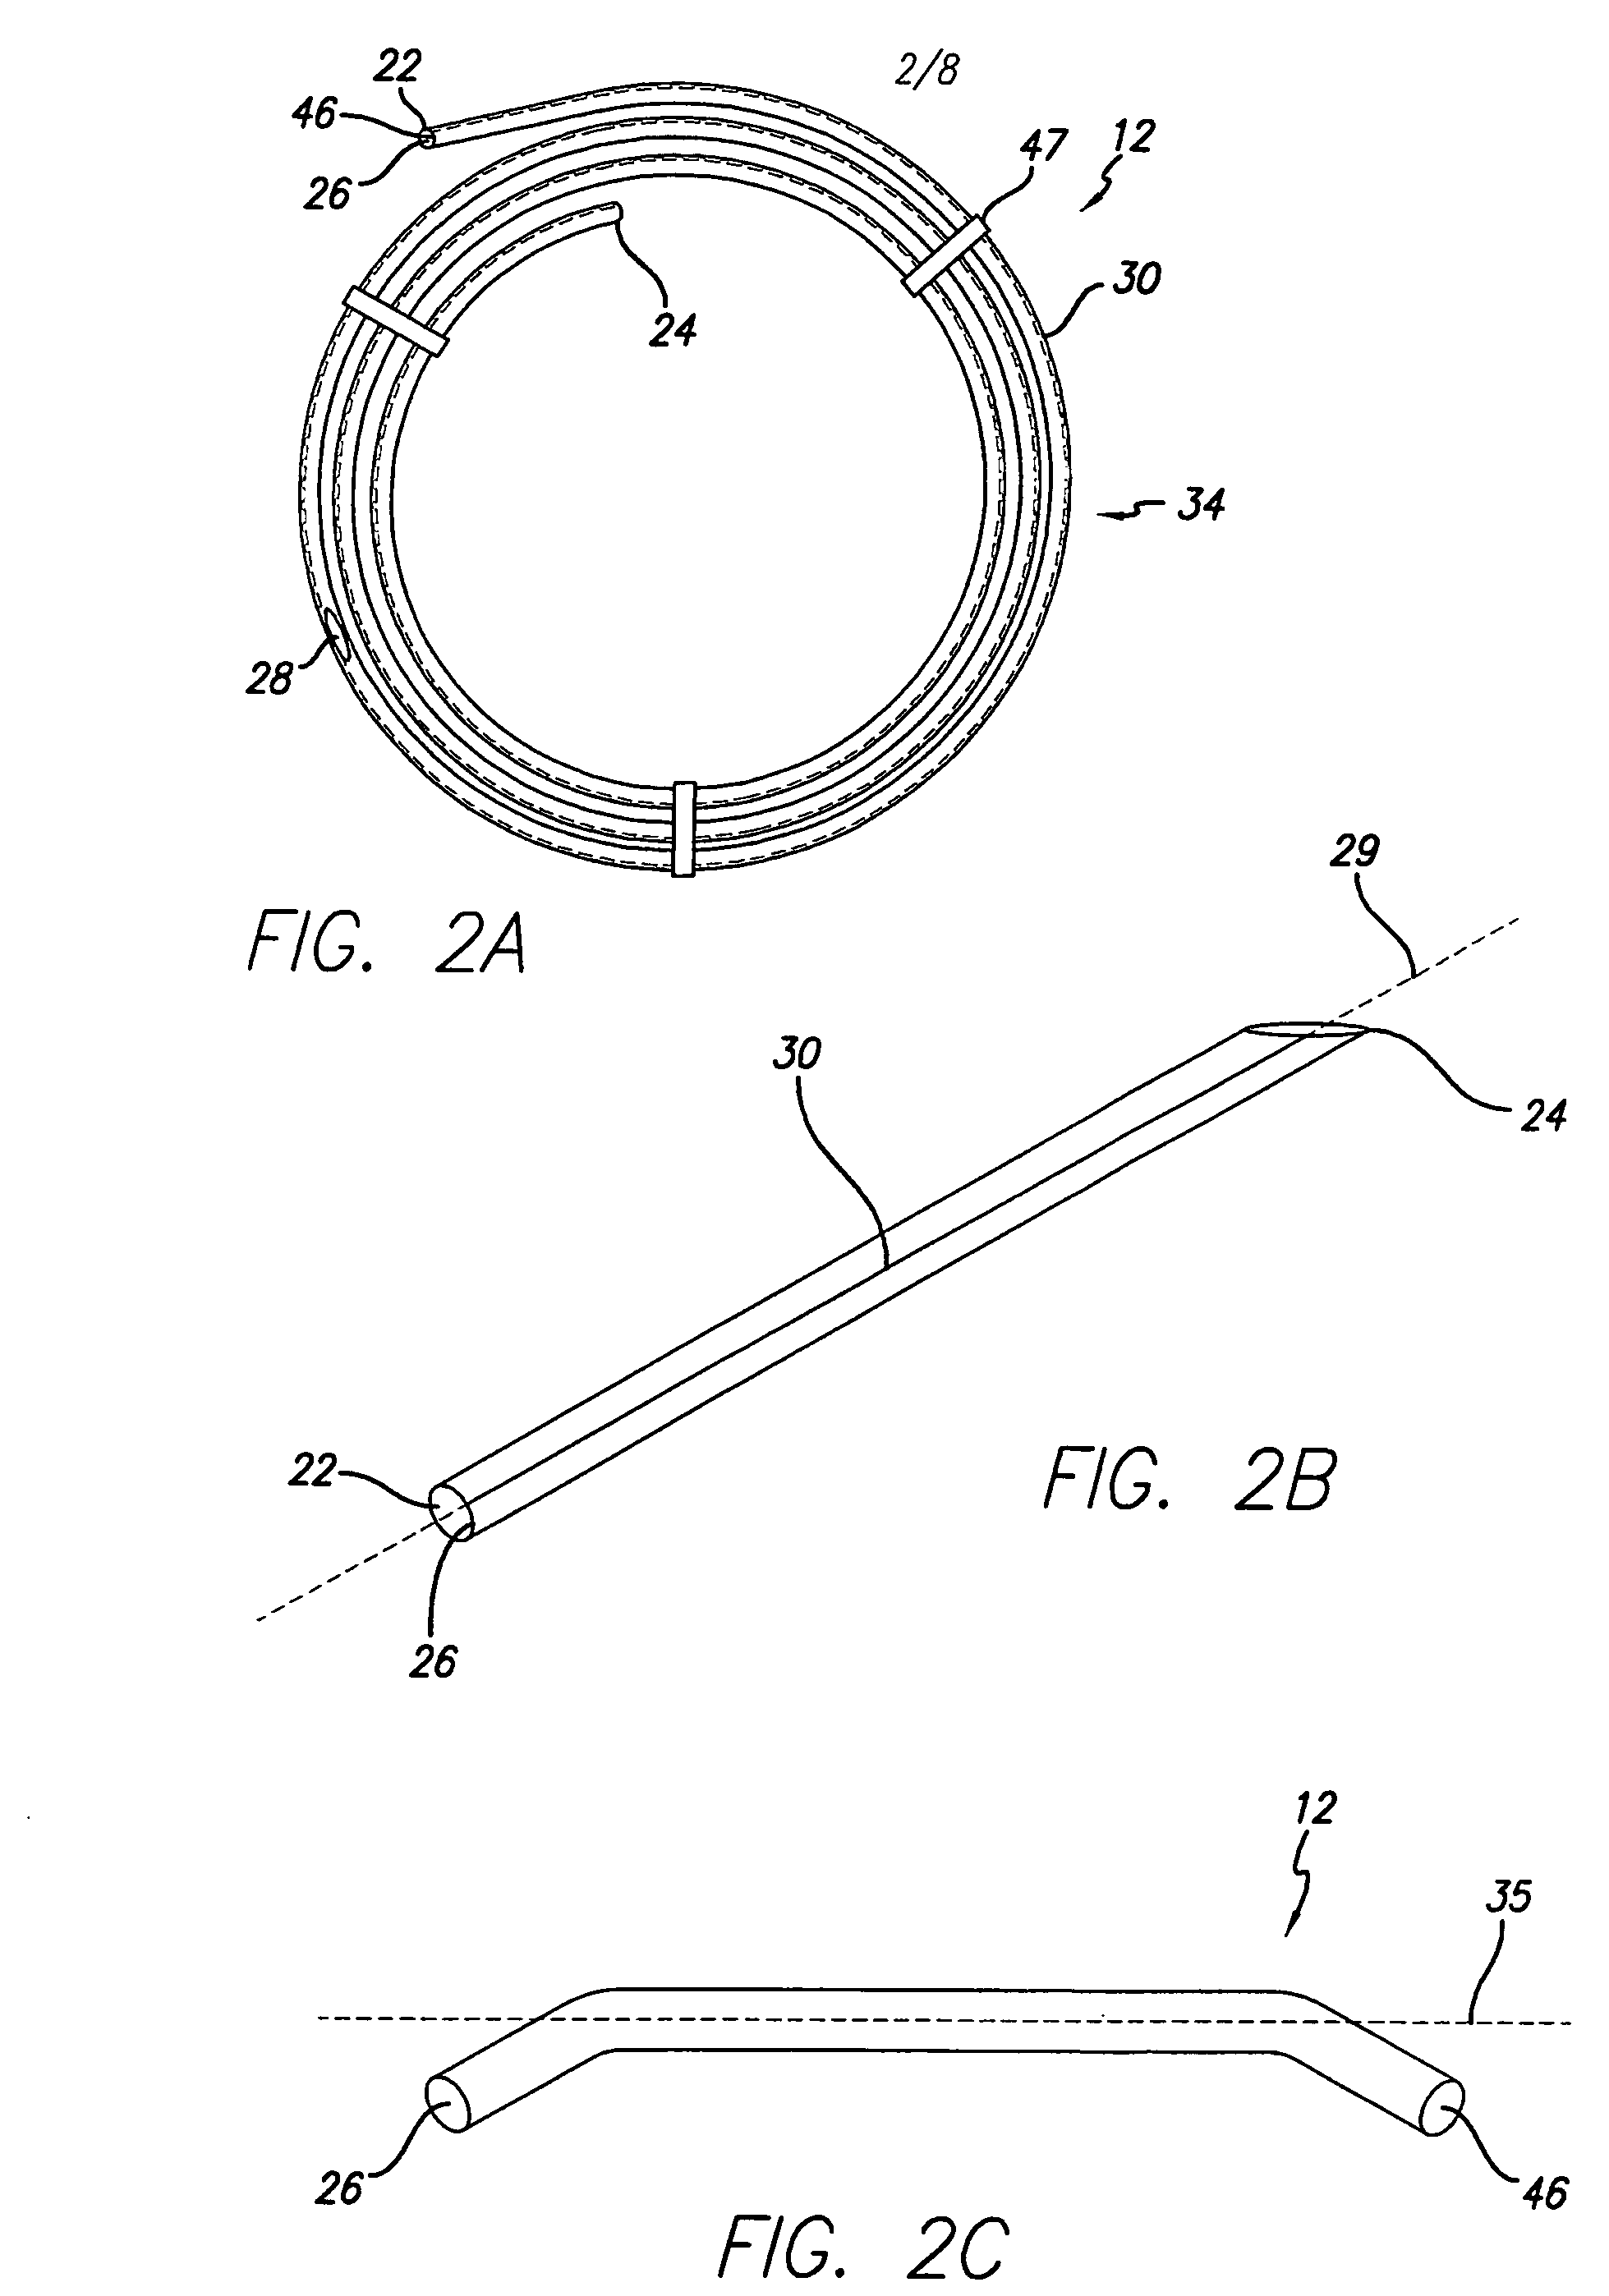 Medical device packaging assembly and method for medical device orientation